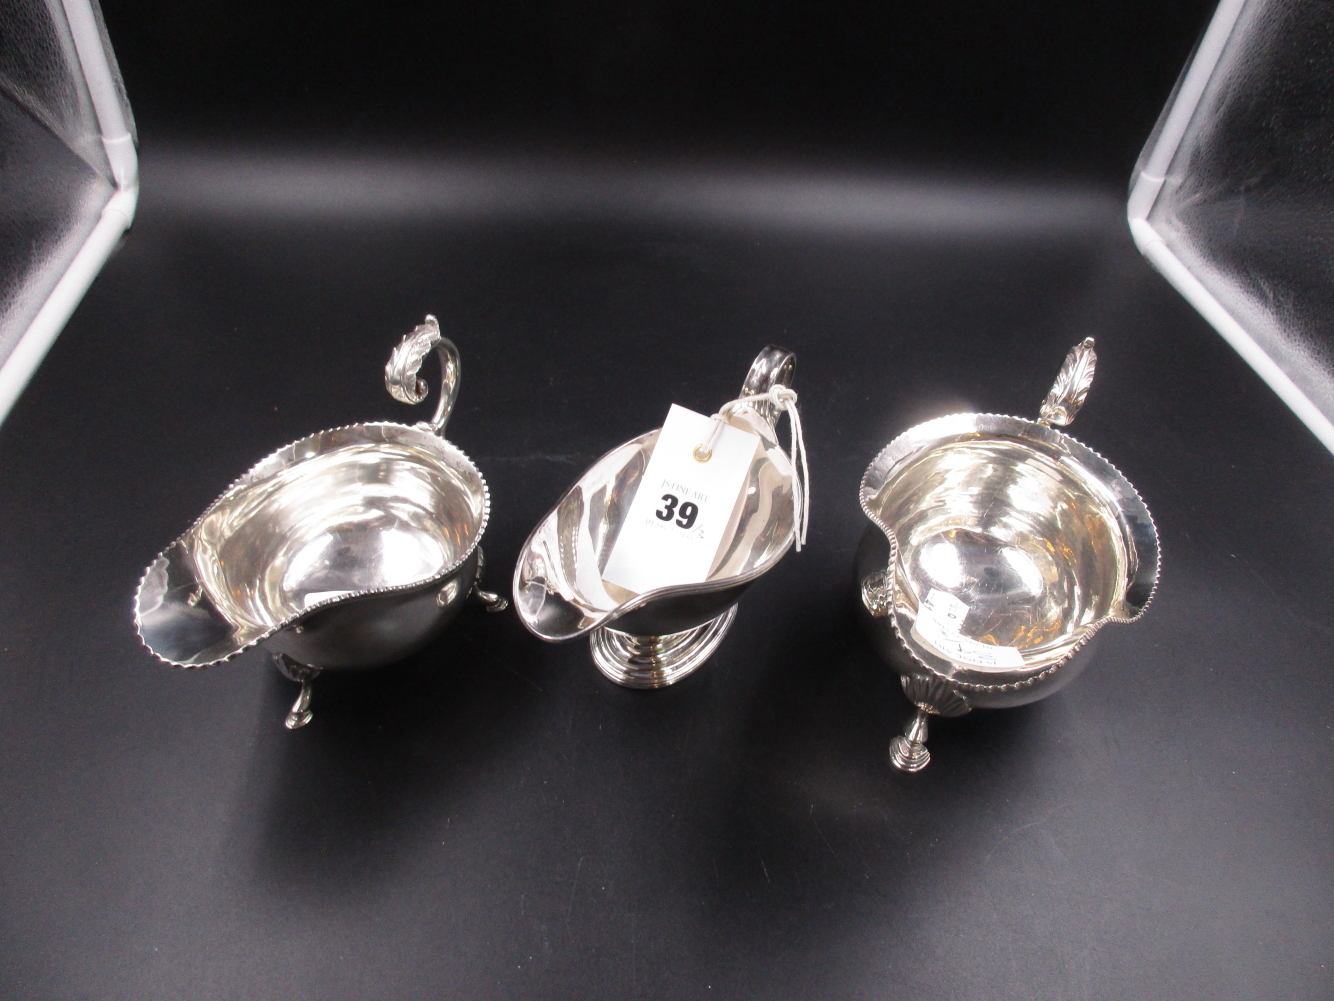 THREE SILVER HALLMAKED SAUCE BOATS, VARIOUSLY DATED 1936 AND 1977, FOR J B CHATTERLEY & SONS LTD,